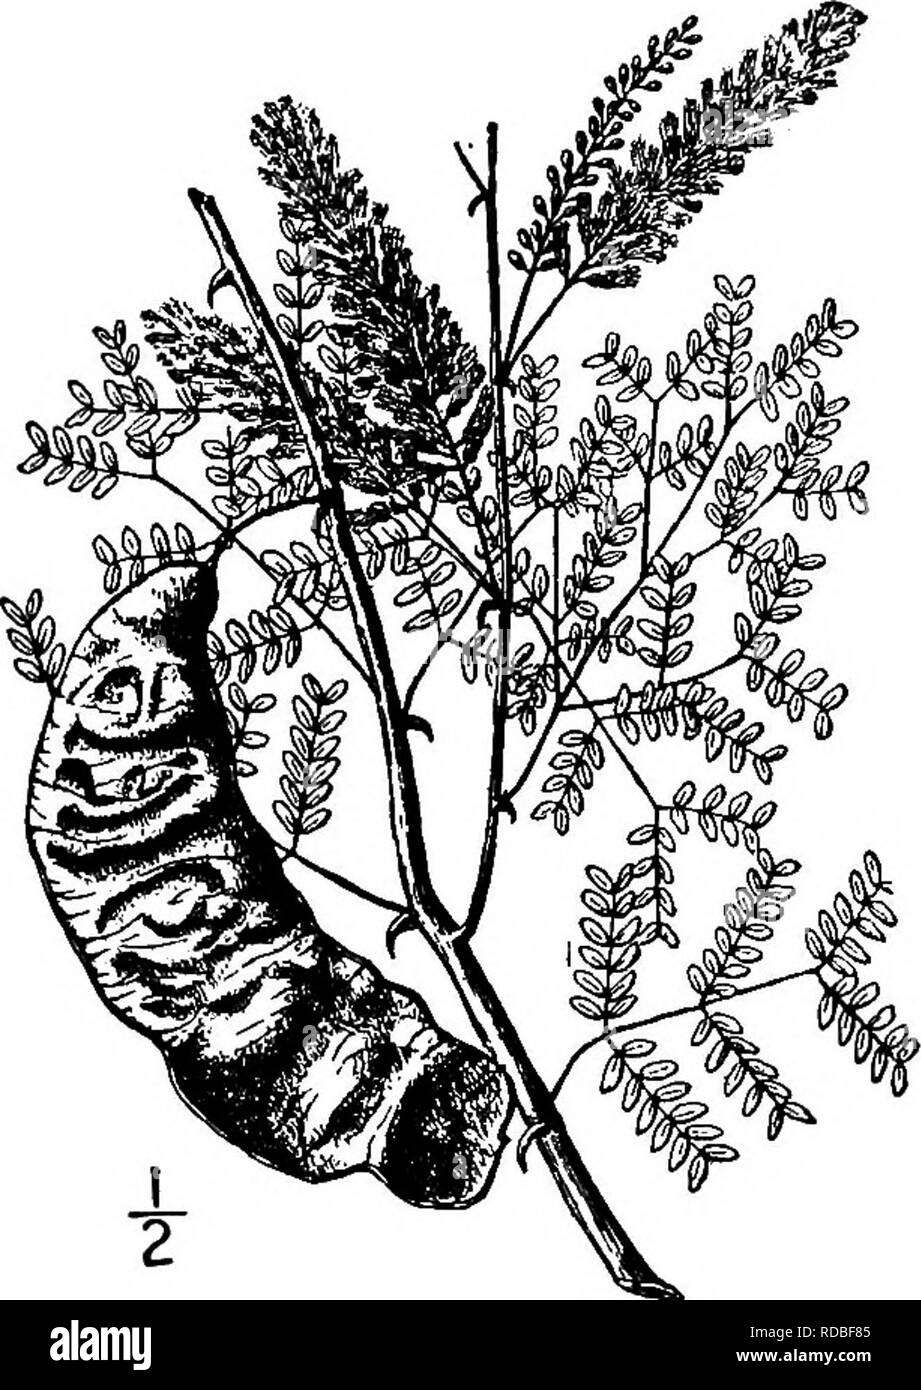 . North American trees : being descriptions and illustrations of the trees growing independently of cultivation in North America, north of Mexico and the West Indies . Trees. Paradise Flower 523 The fragrant flowers, opening from March to August, are perfect, Kght yellow, in axillary racemes 3 to 5 cm. long, i cm. in diameter; pedicels short, slender, hairy; the calyx is minutely 5-lobed, hairy, about 1.5 mm. long; petals spatulate, 3 mm. long; sta- mens numerous, twice the length of the pet- als; ovaty stalked and hairy. The fruit is flat, oblong, slightly curved, 8 to 11 cm. long, 2 to 2.5 c Stock Photo